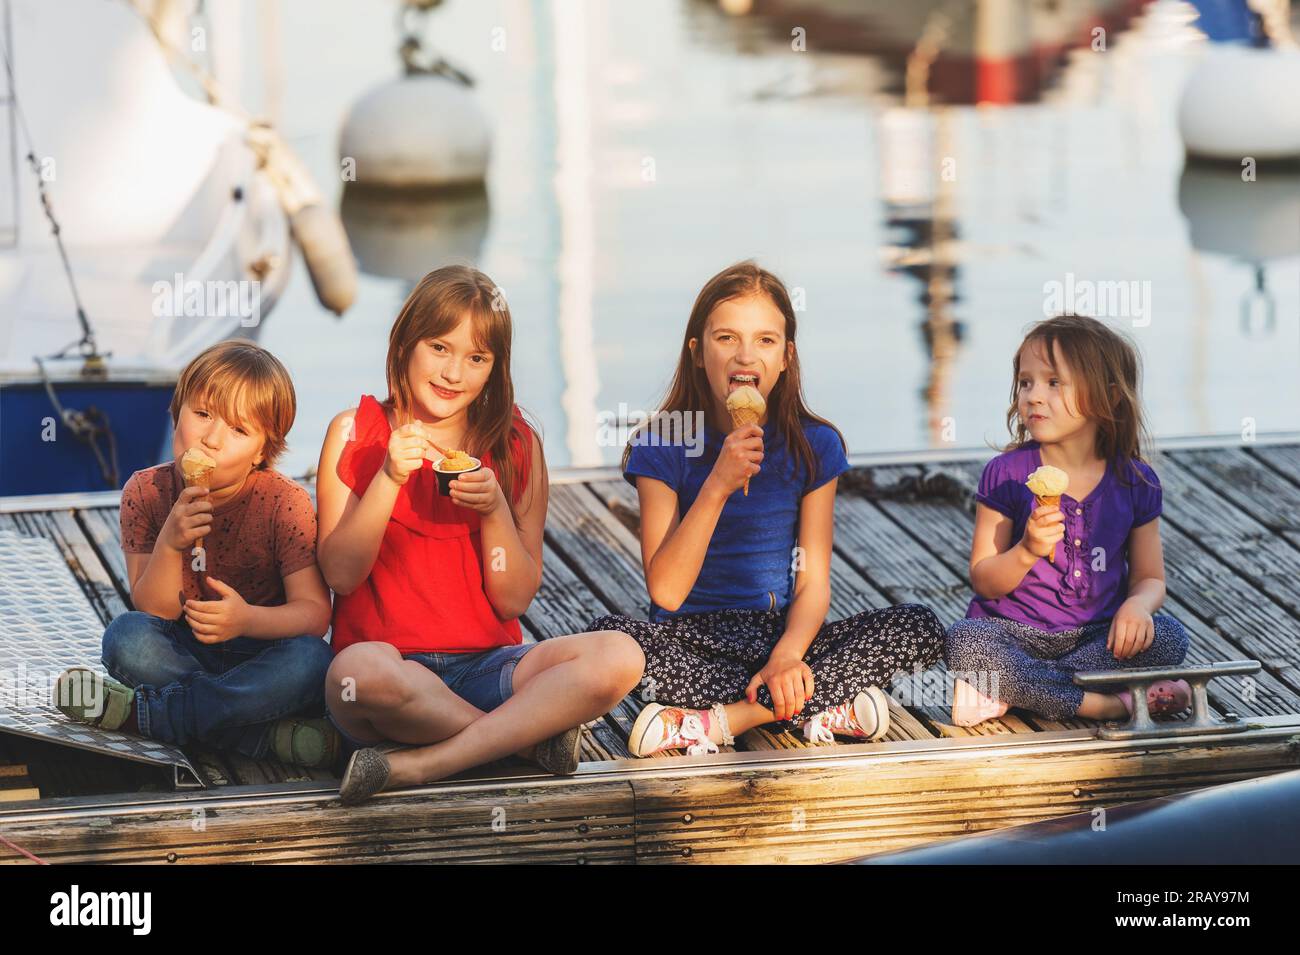 Group of four kids, 3 girls and one boy, eating ice cream outdoors, resting on a pier by the lake Stock Photo